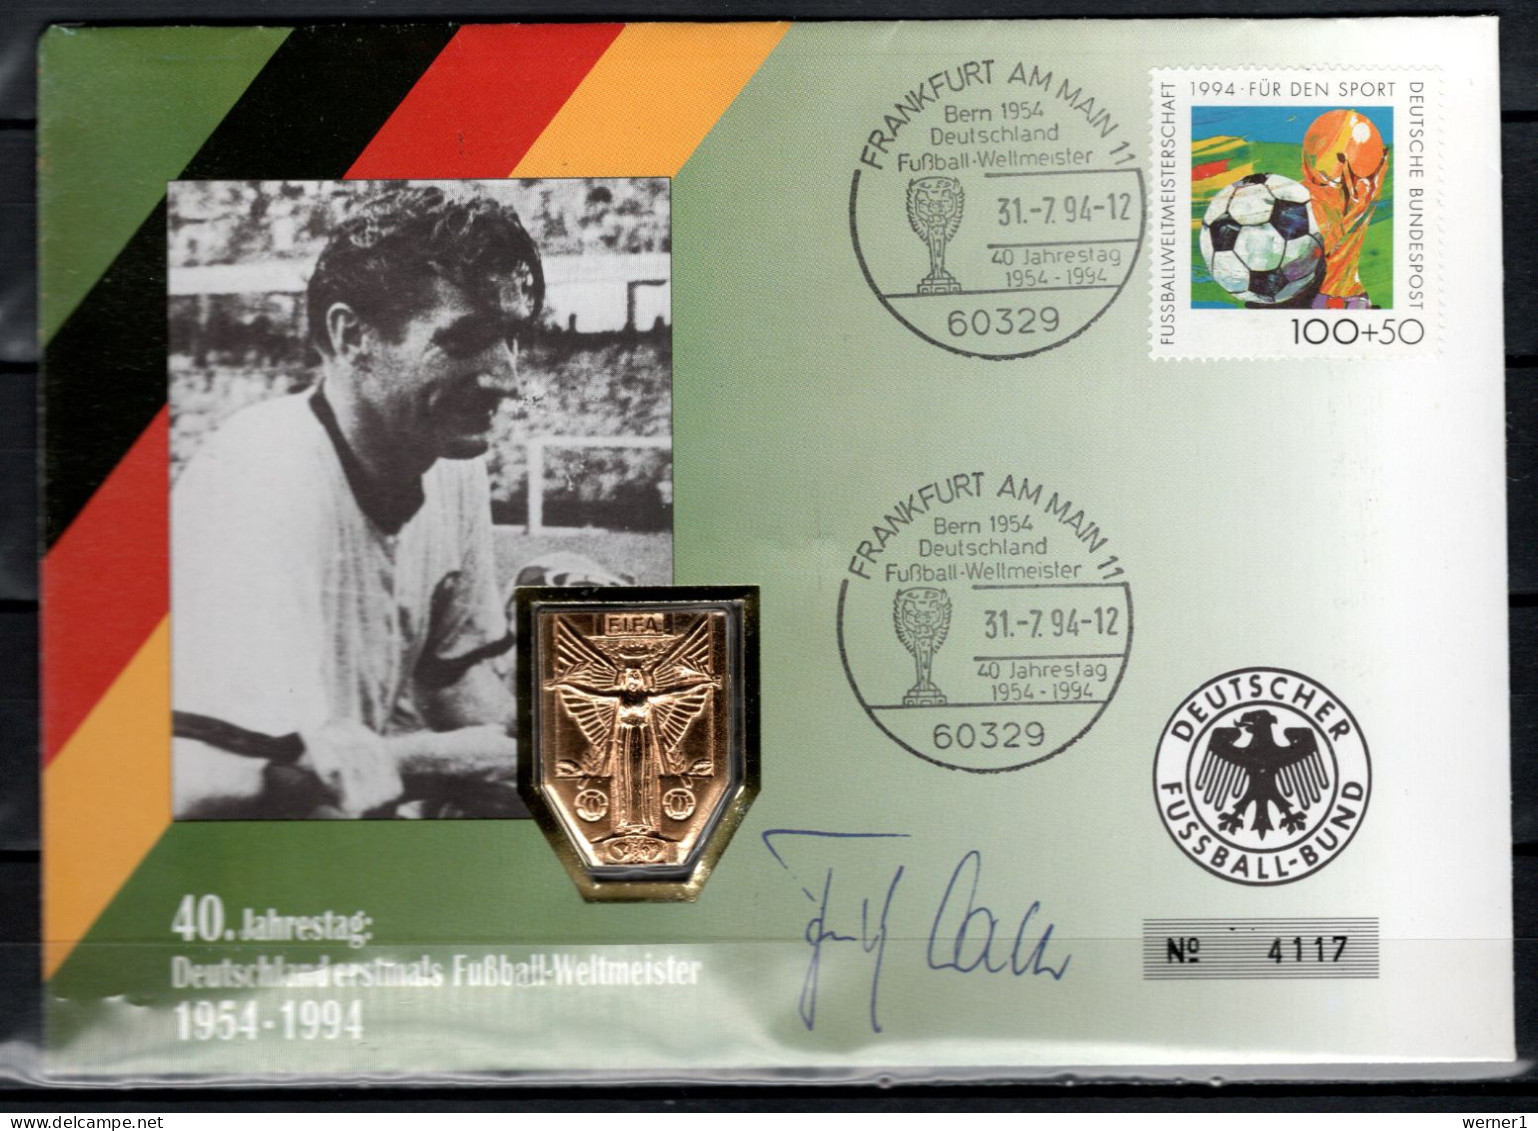 Germany 1994 Football Soccer World Cup Commemorative Cover With Medal And Original Signature Of Fritz Walter - 1994 – Verenigde Staten